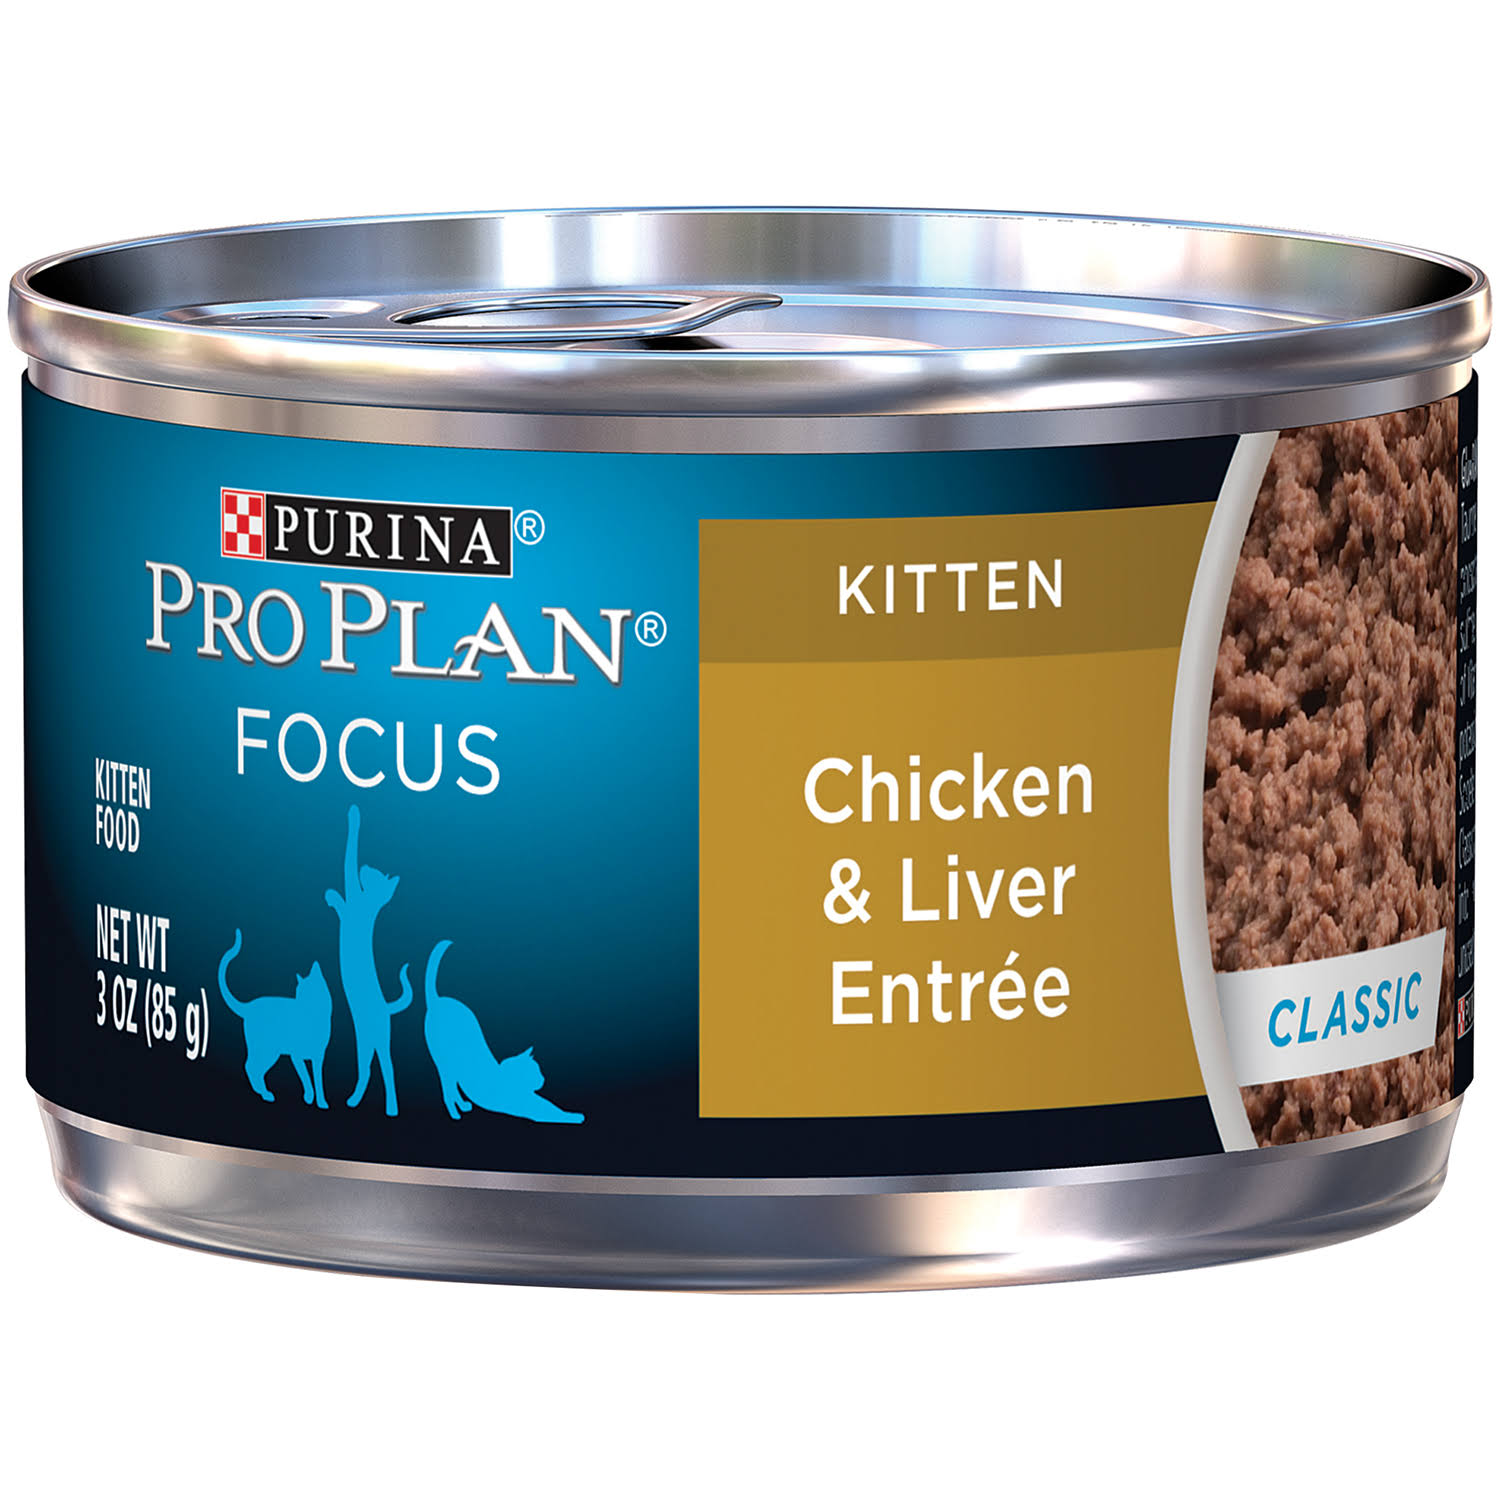 Pro Plan Kitten Canned Food - Chicken and Liver Entree, 3oz